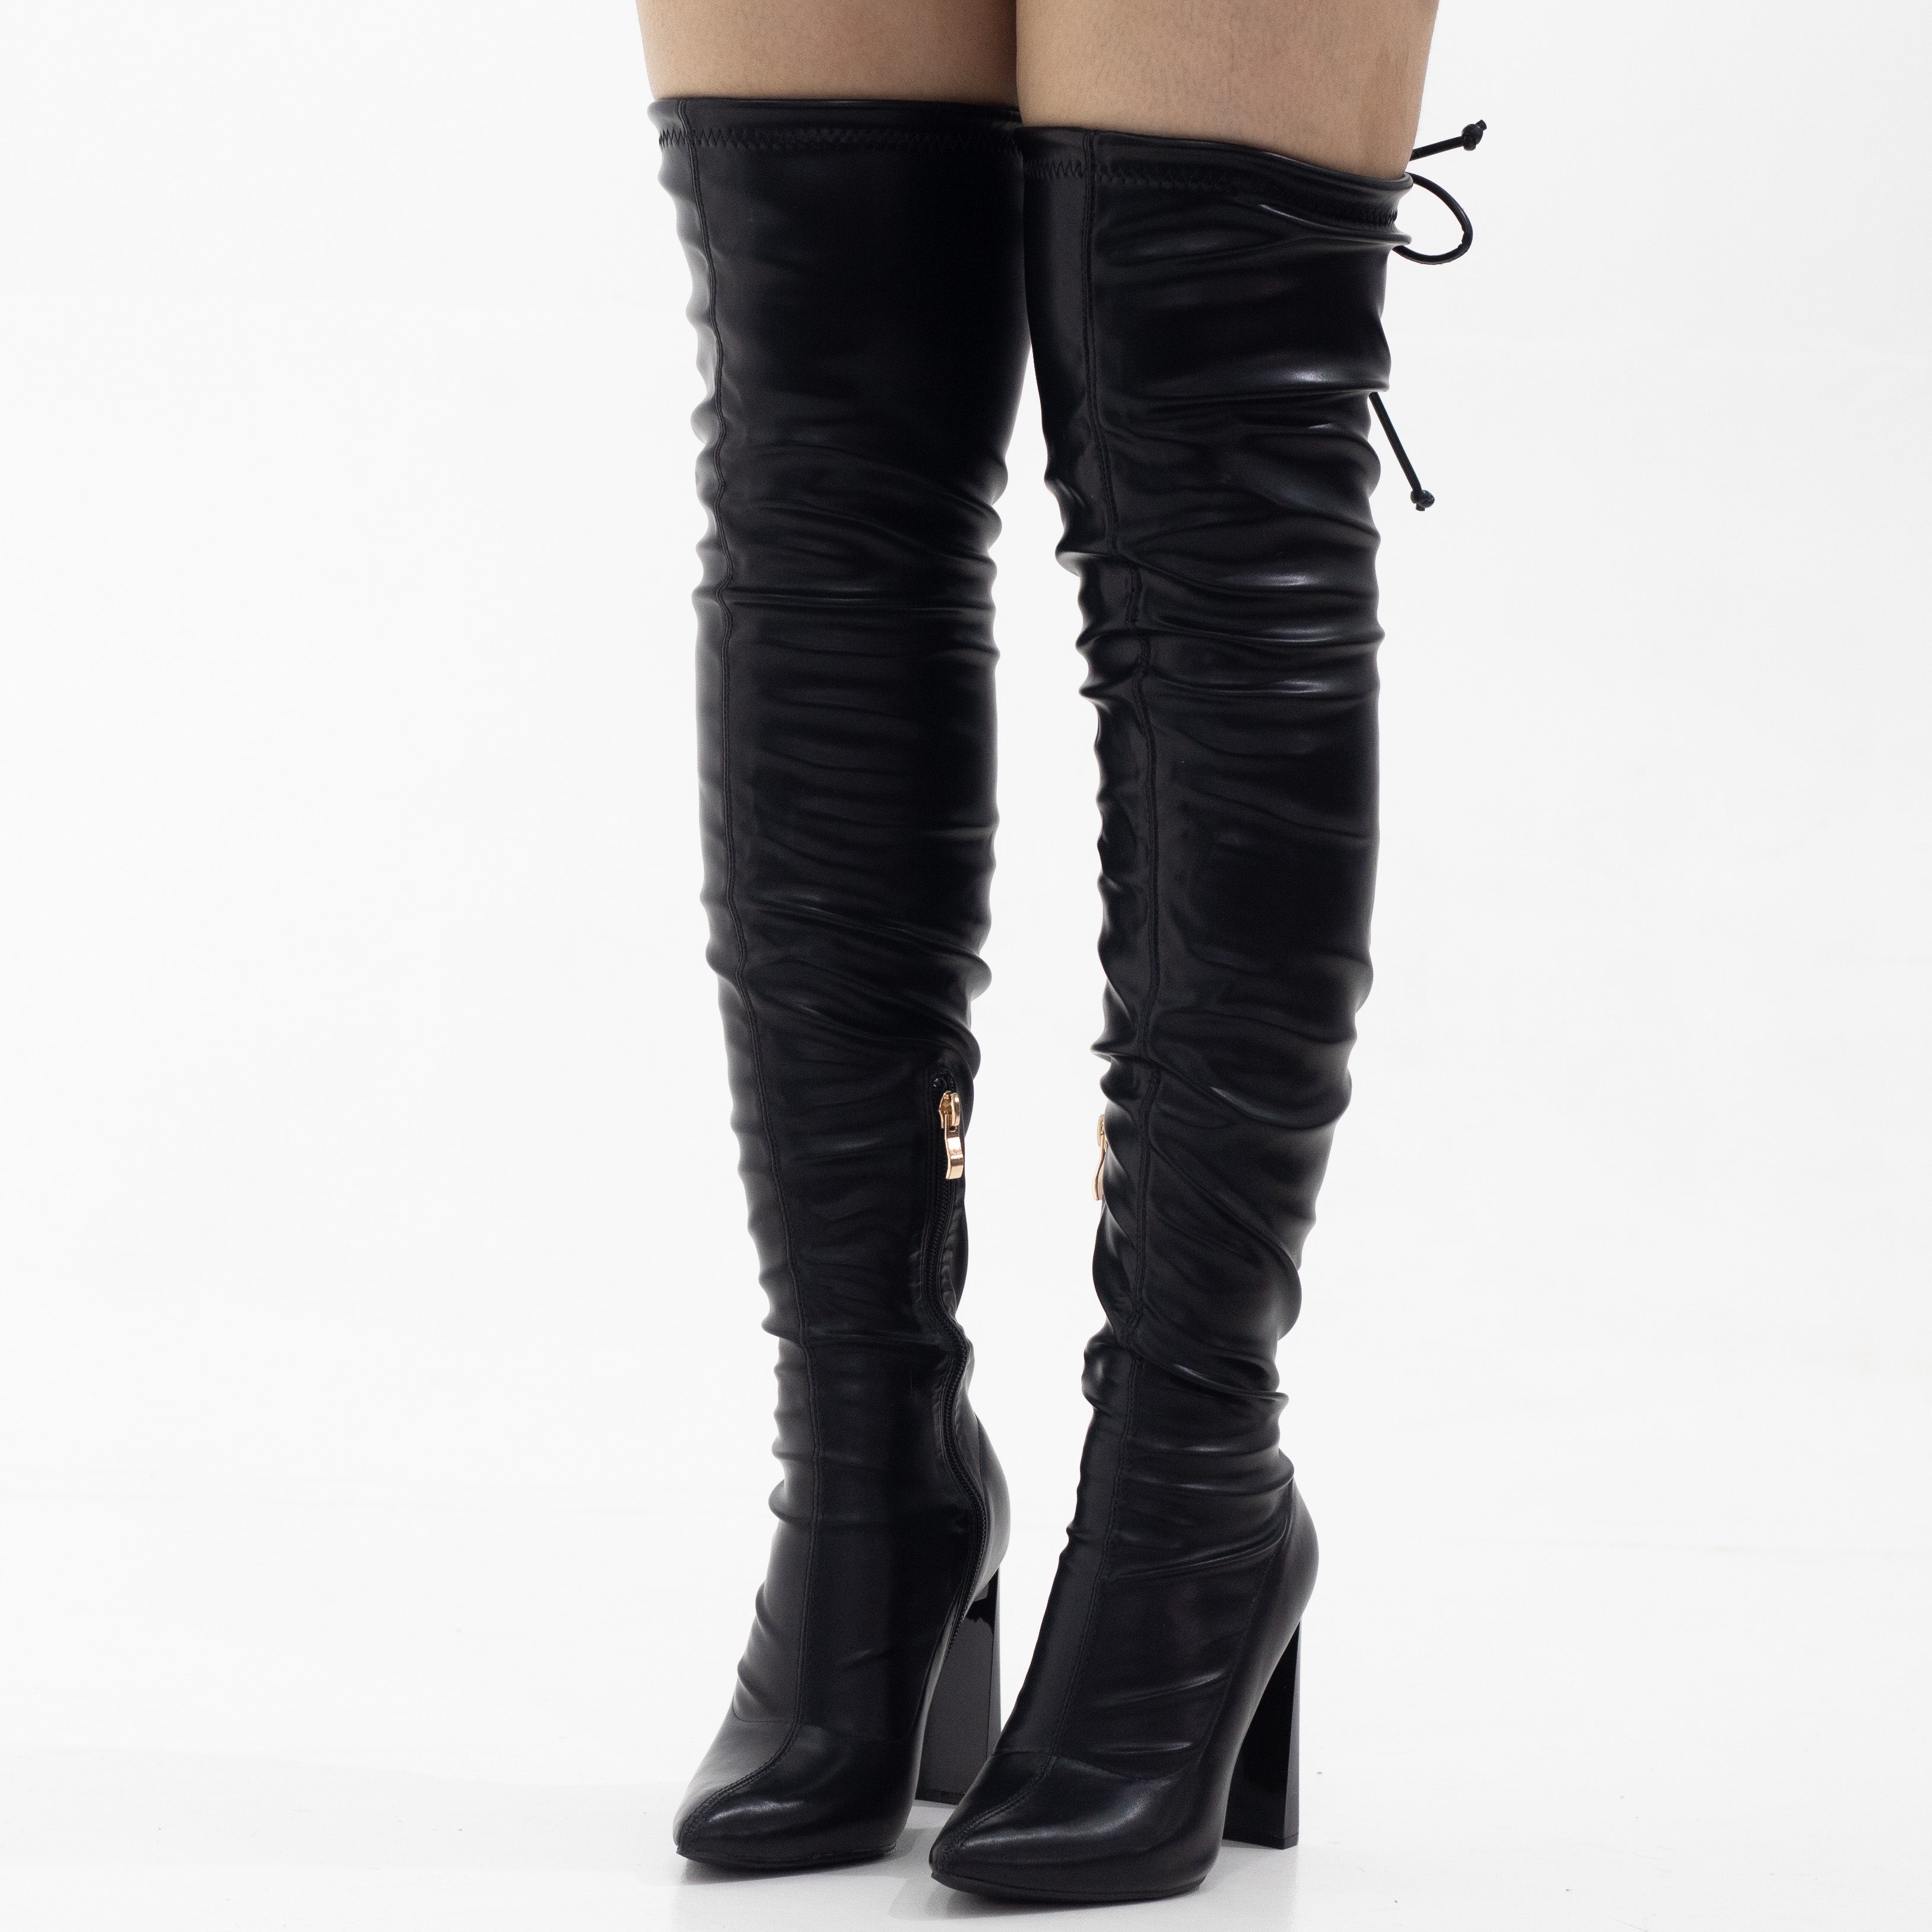 Black thigh high pointy high 10.5cm heel boot tomian